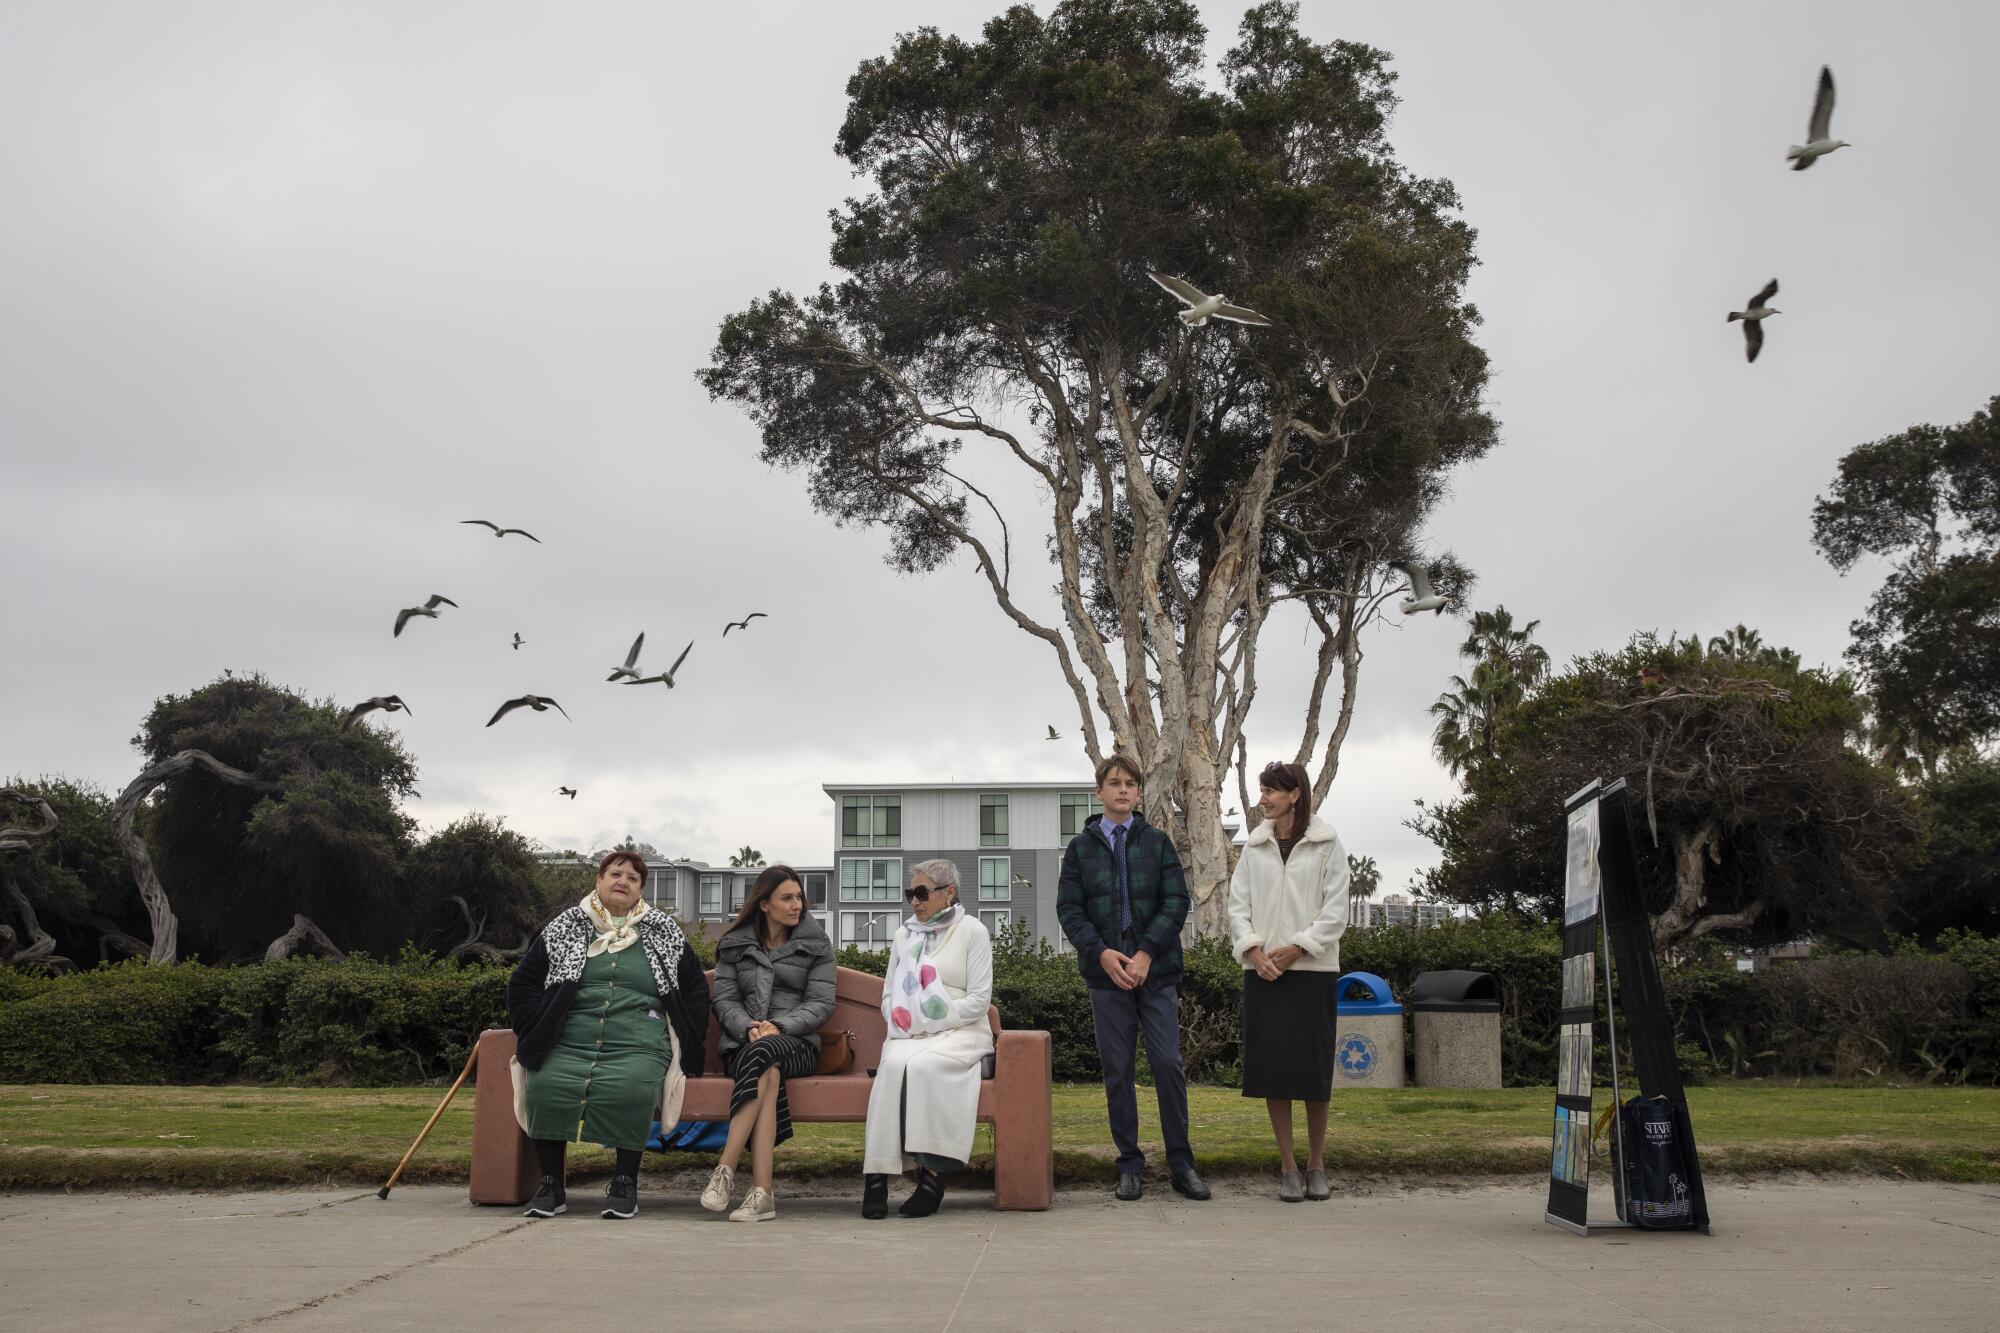 Three people sit on a bench and two stand next to a display of Jehovah's Witnesses pamphlets in La Jolla Shores